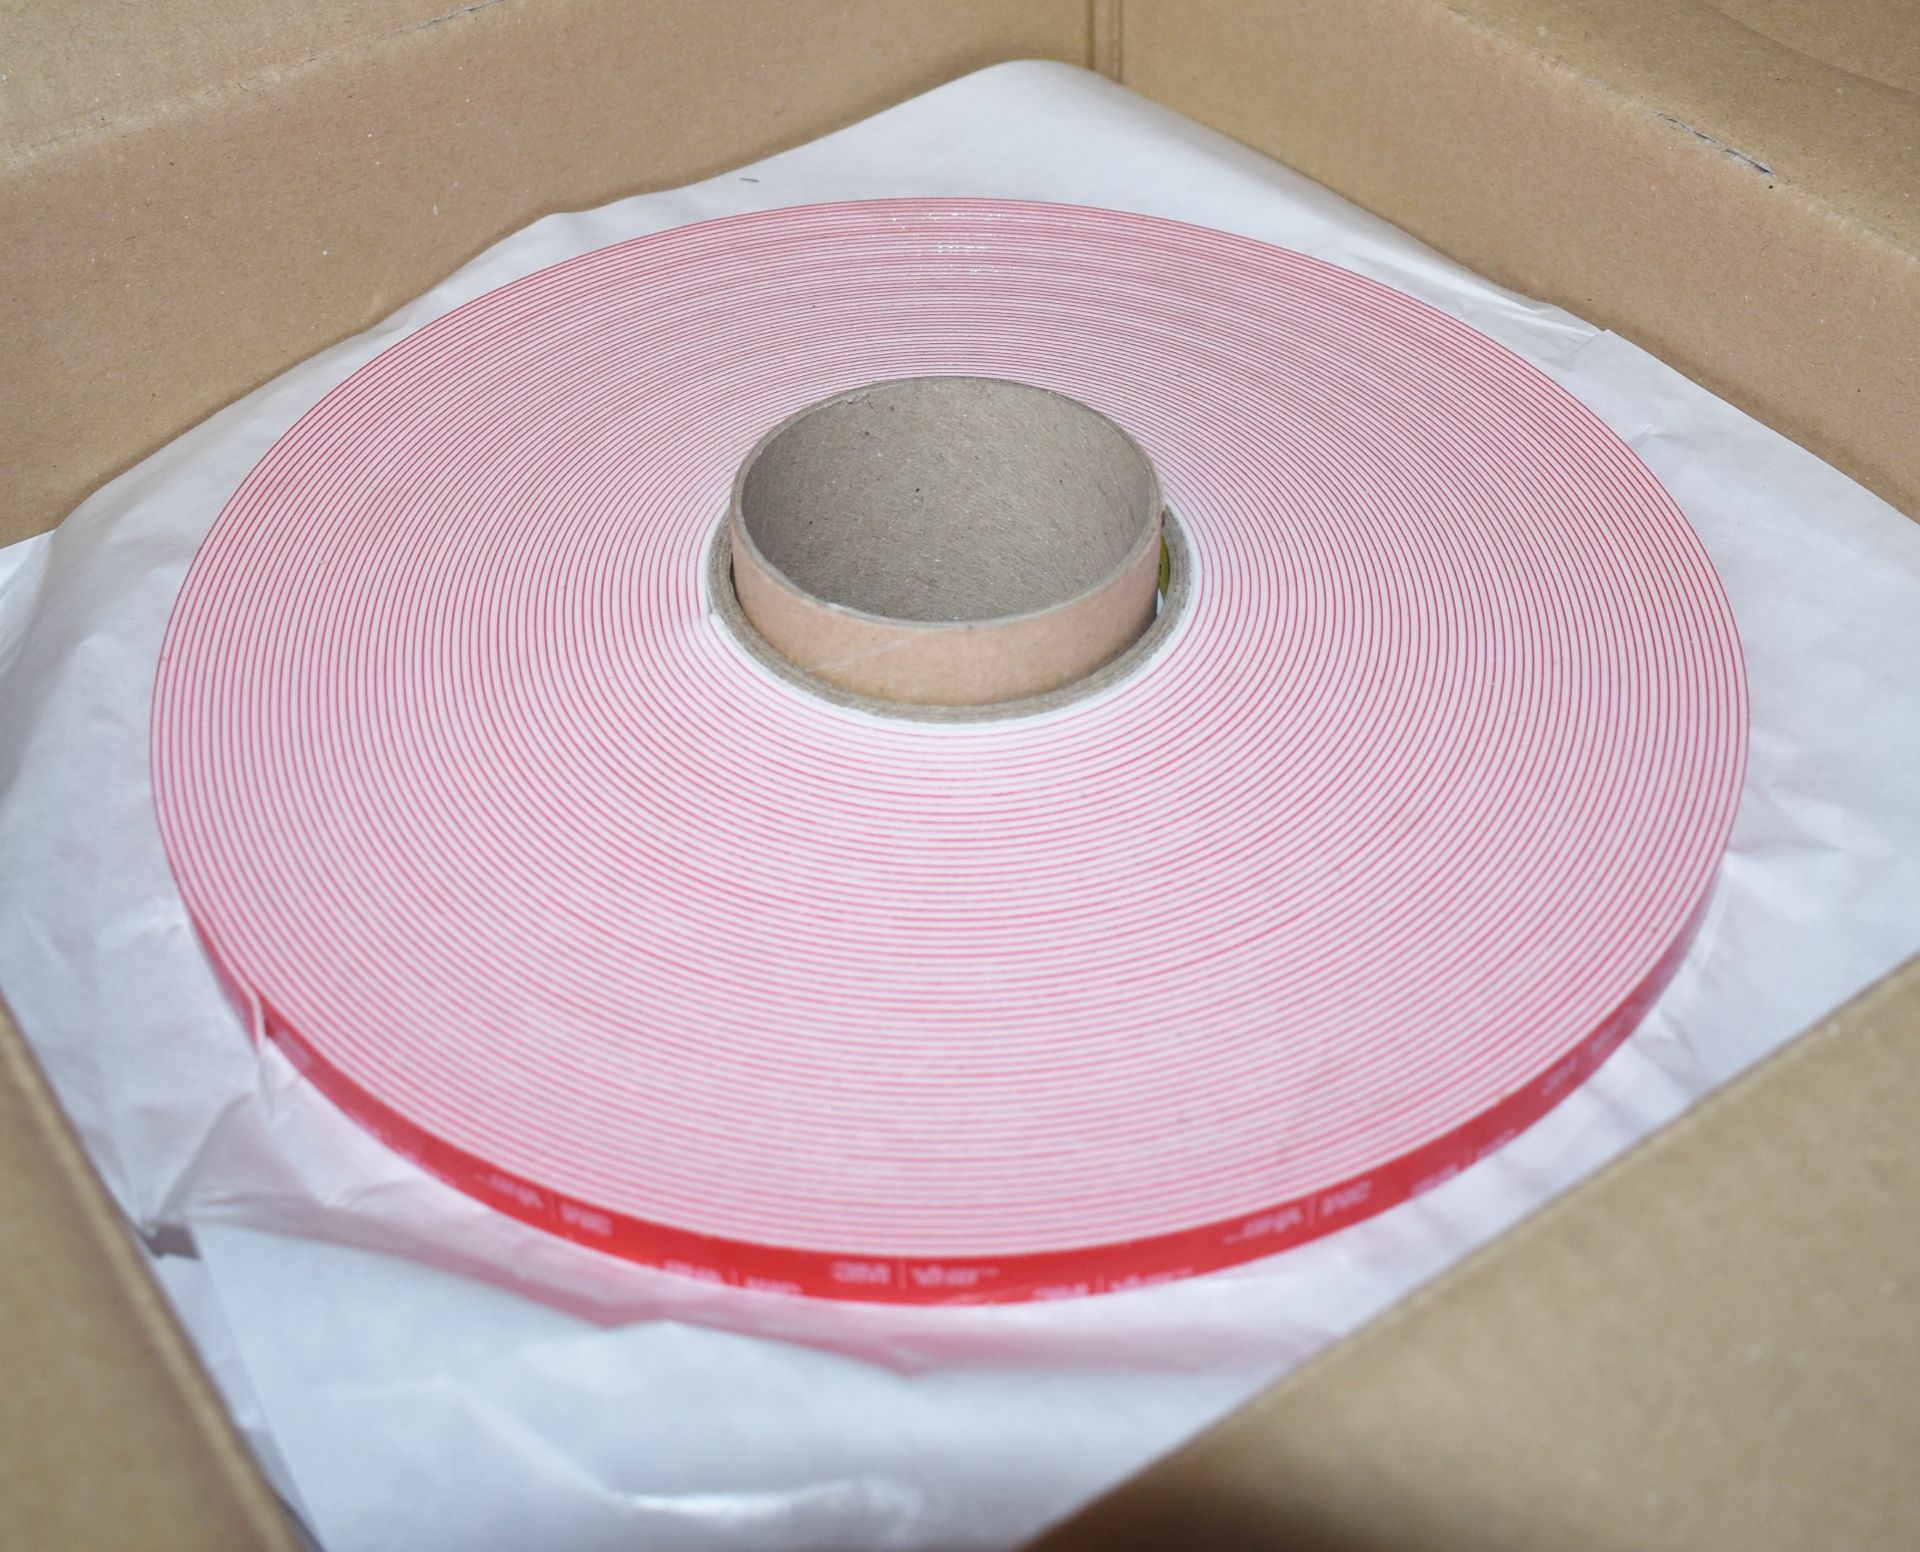 1 x Roll of 3M VHB Double Sided Acrylic Adhesive Foam Core Tape - Type LSE-160WF - RRP £42 - New - Image 3 of 3